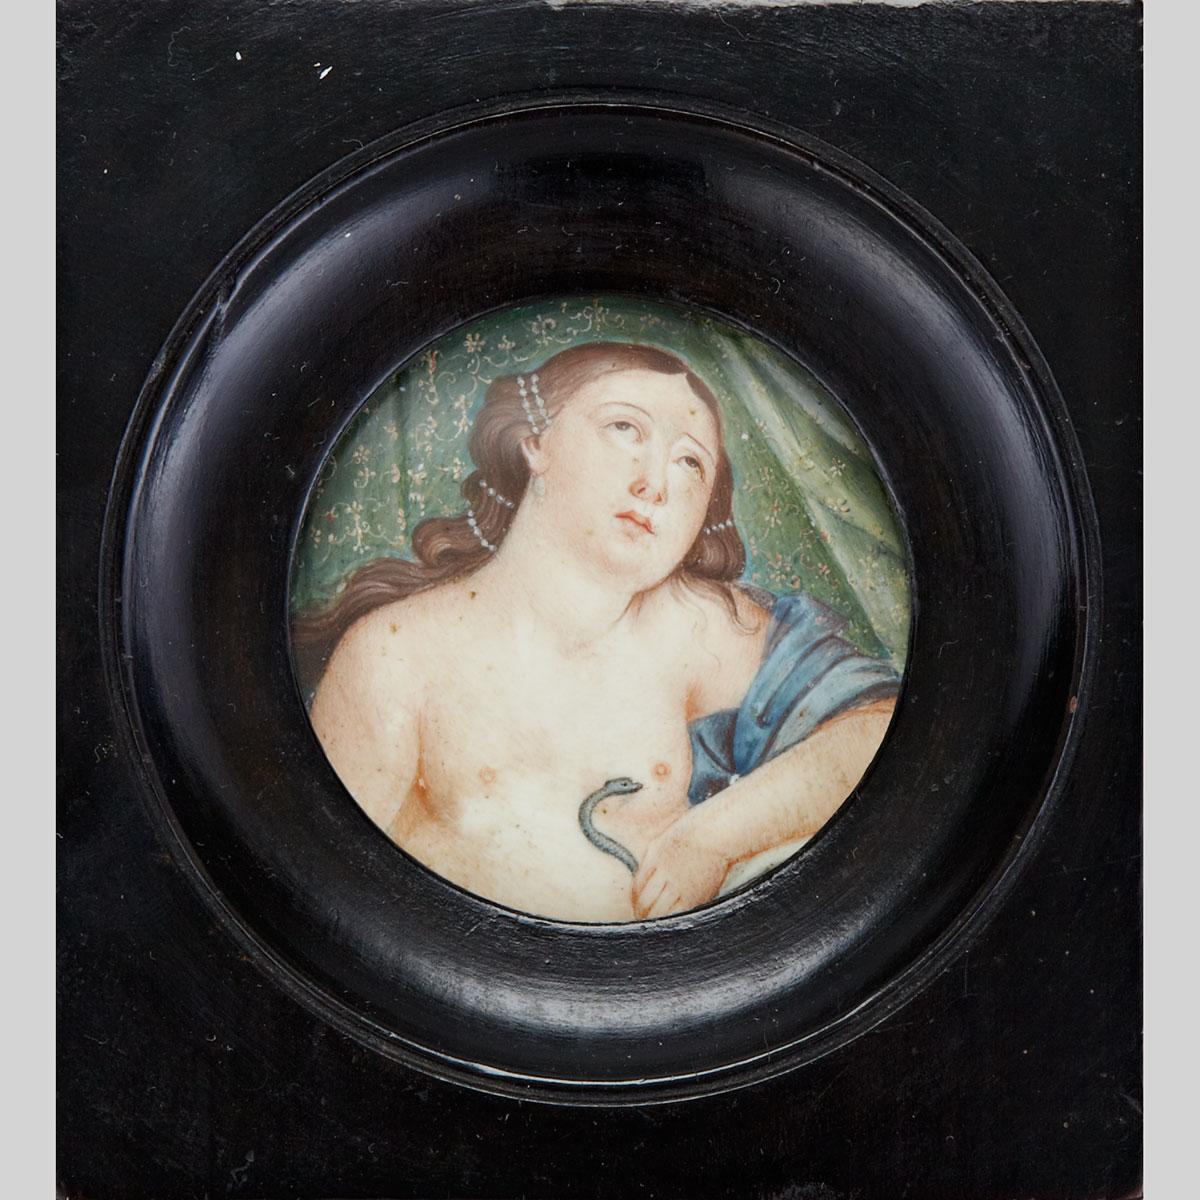 Italian School Miniature Portrait of Cleopatra and the Asp, early 19th century